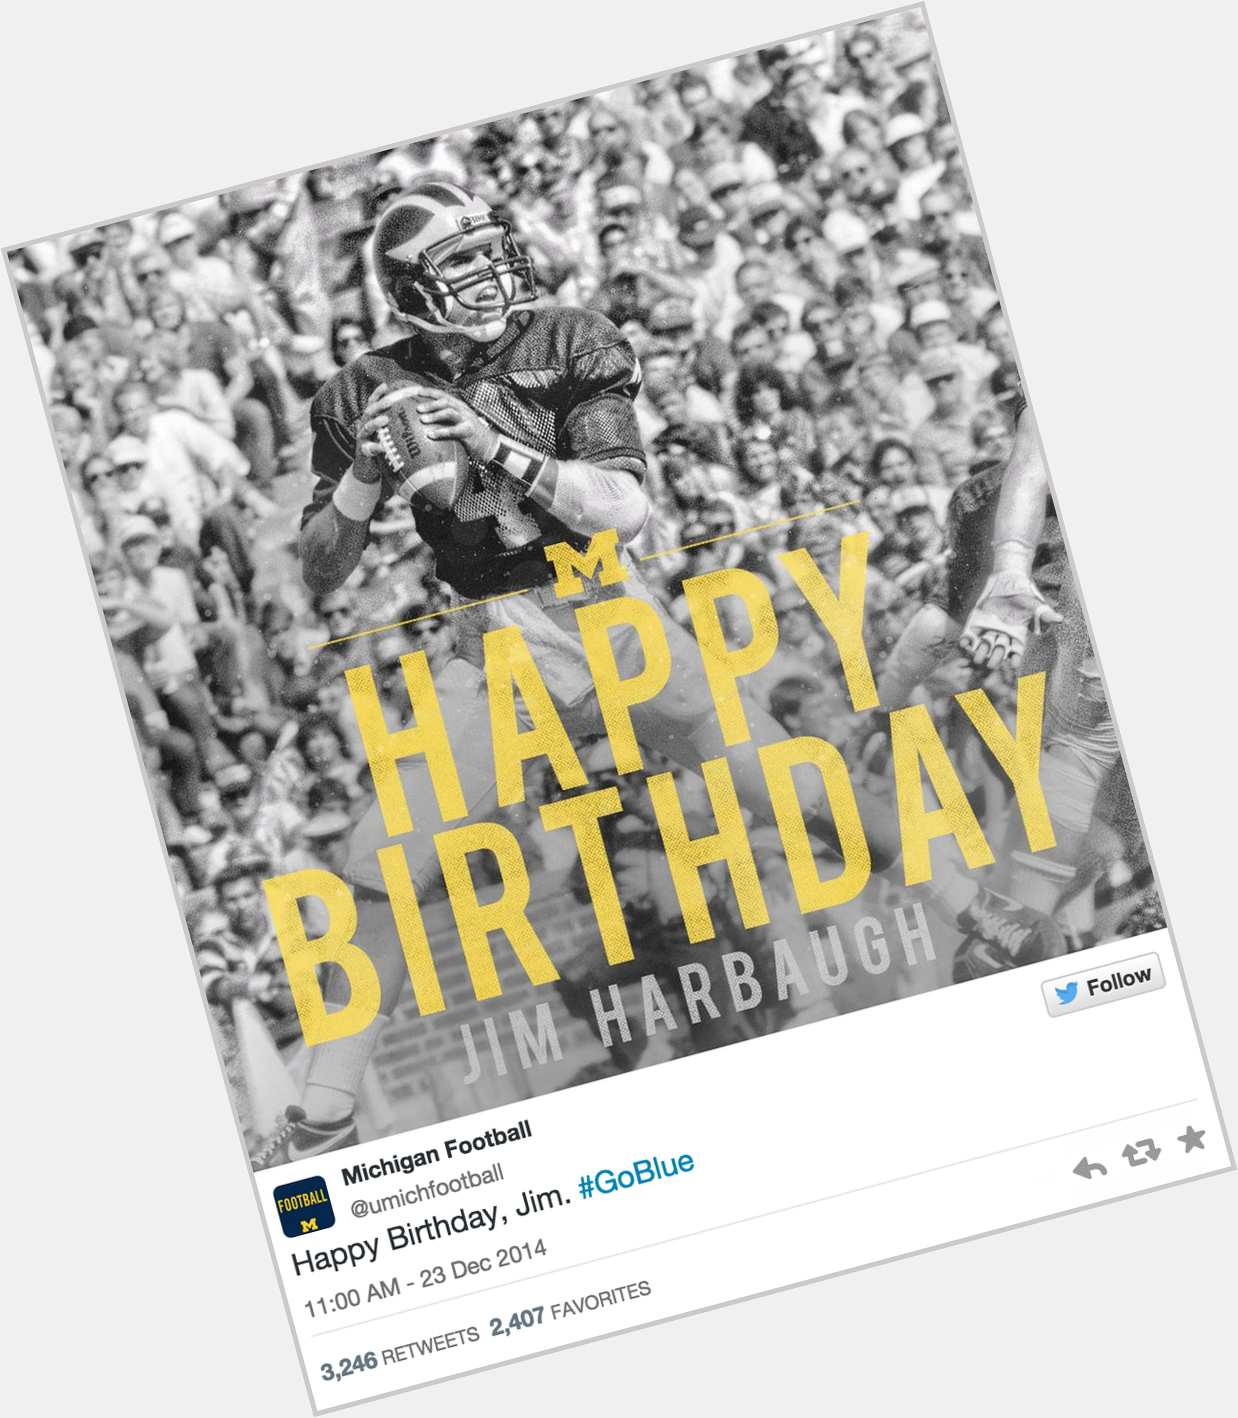   Michigan messageed a happy birthday to 49ers coach Jim Harbaugh today. Hmmmm »   so ?